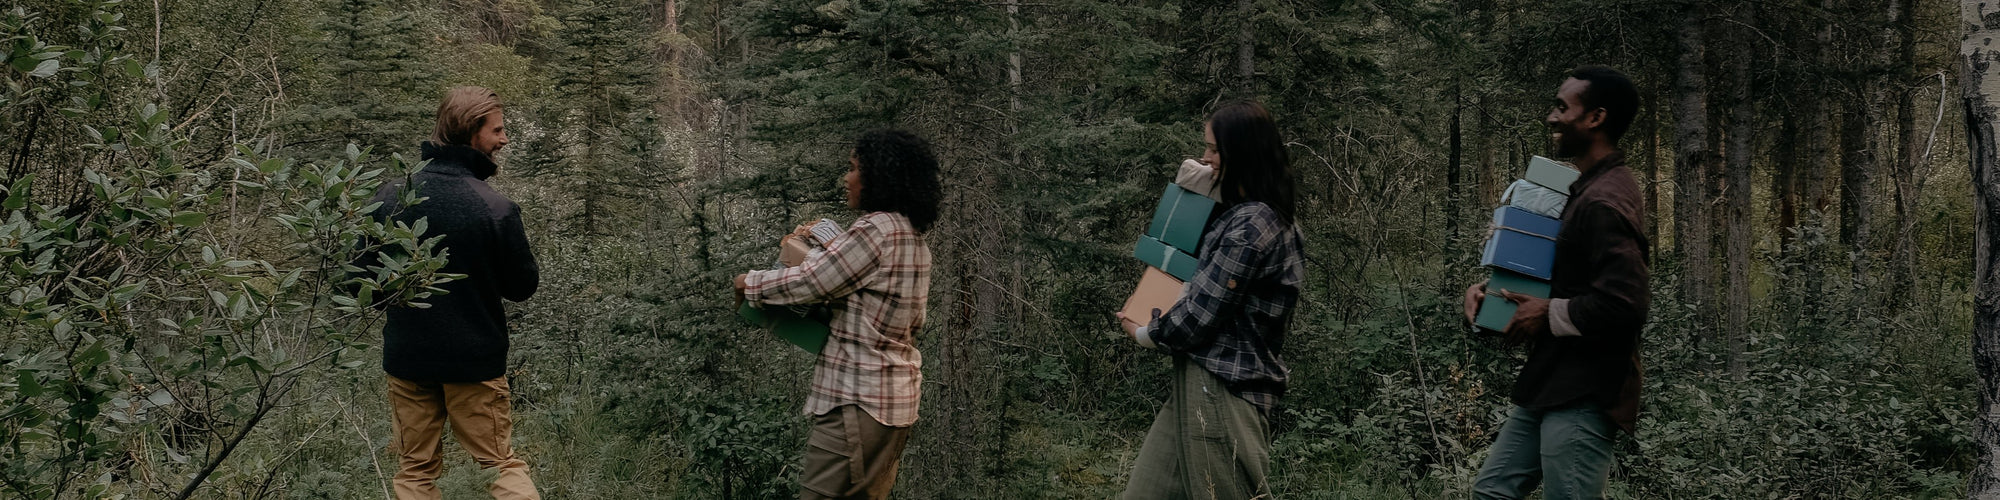 four people walking through the woods with gifts